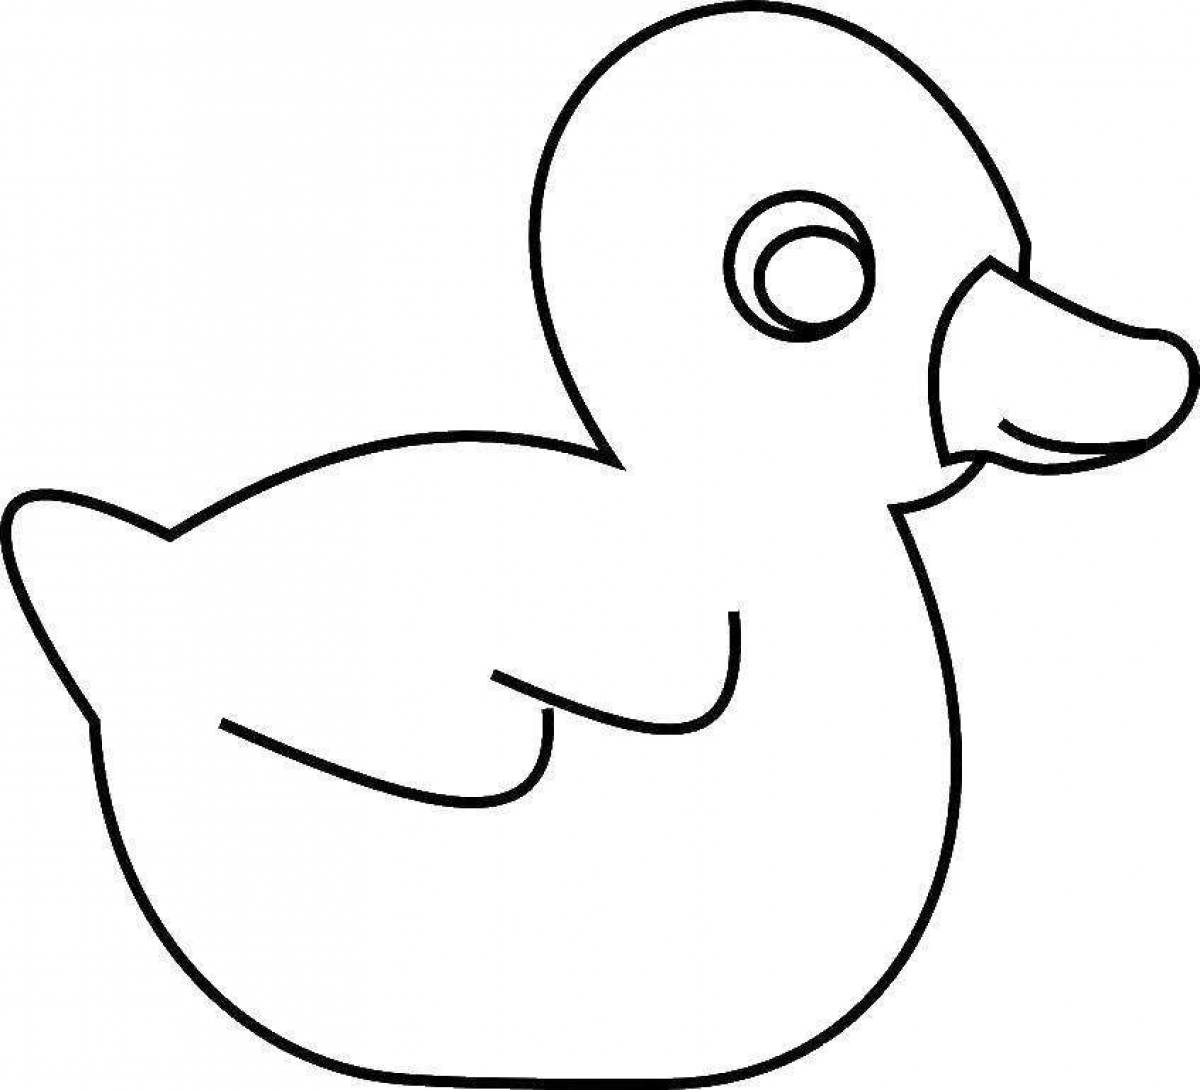 Lalafan freaky duck coloring page